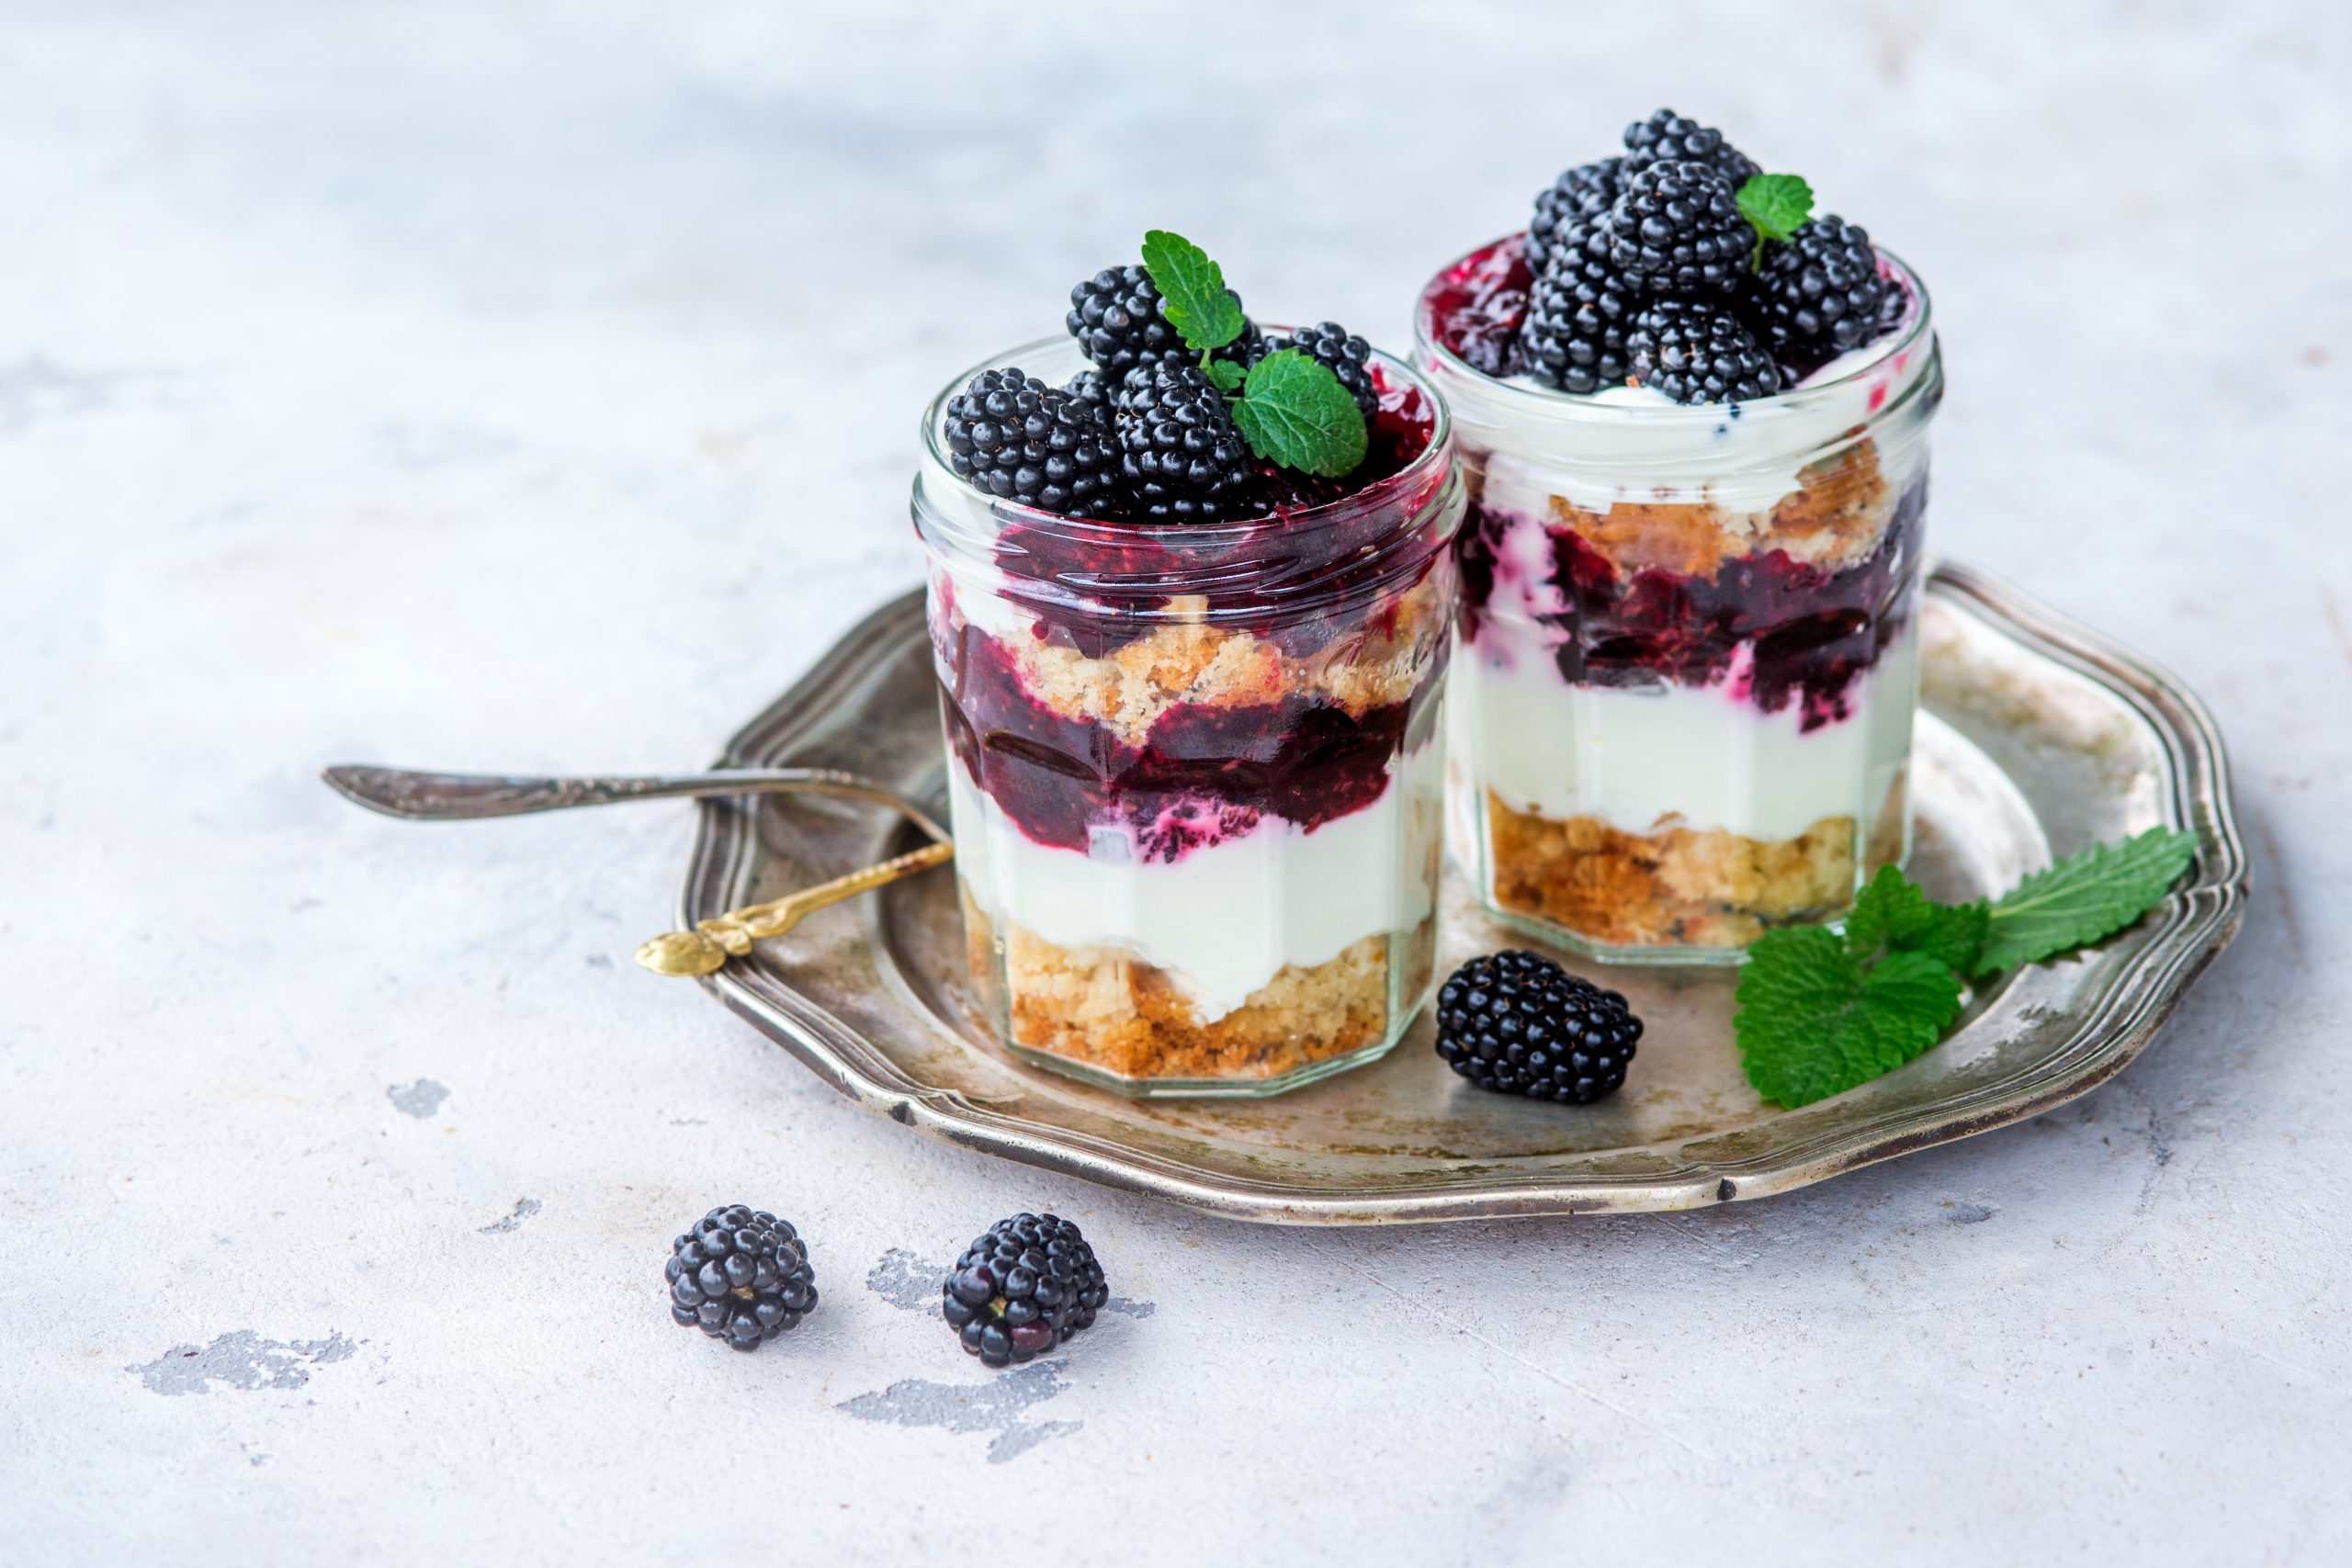 Blackberry Trifle: This summer trifle is layered with crumbly cubes of orange pound cake, orange liqueur, creamy custard, blackberry compote (blackberries simmered with a little sugar, orange zest, and orange juice), whipped cream, fresh blackberries, and mint leaves for decoration. Macaroons are a good substitute for the cake. 